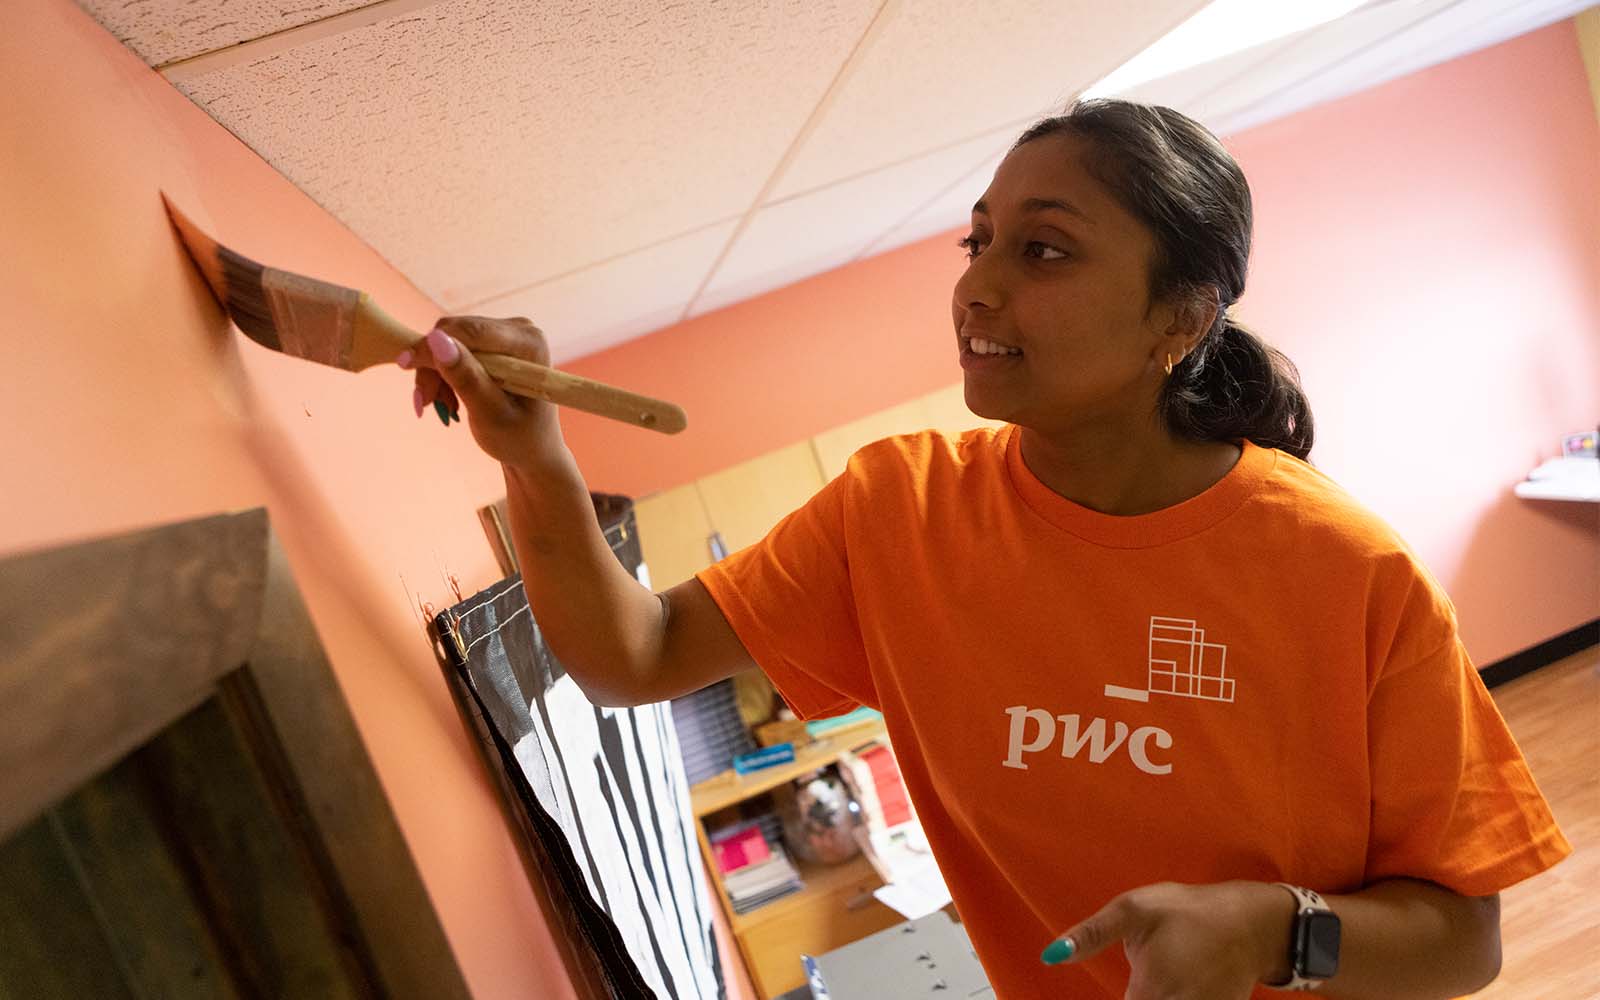 Students involved with the PwC Scholars in the Binghamton University School of Management raised about $15,000 to spruce up the headquarters of Truth Pharm, a nonprofit in Binghamton, N.Y., that advocates for policy changes to reduce the harms caused by substance use.